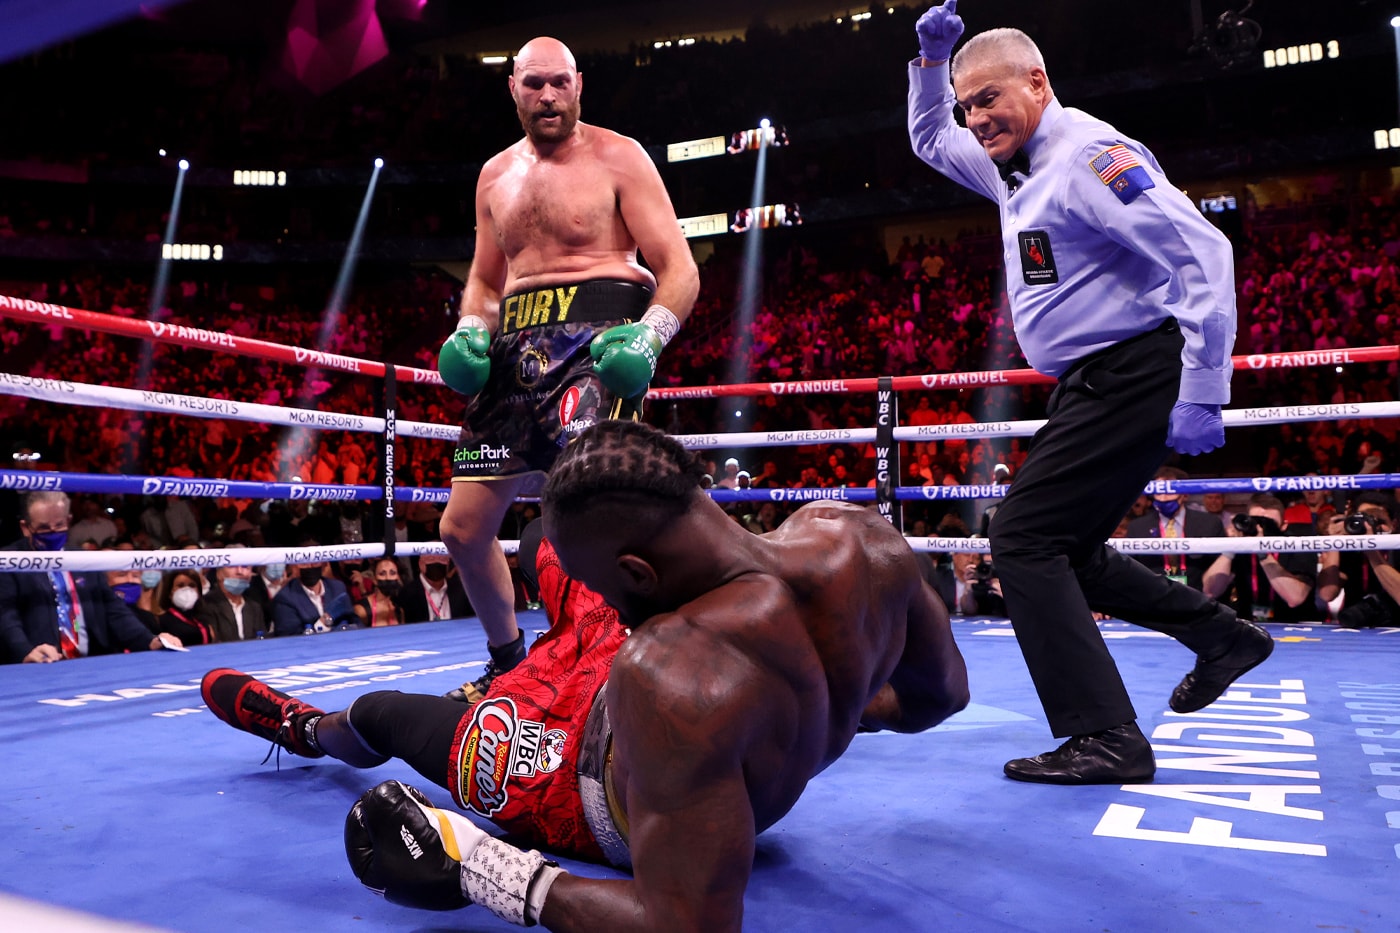 Tyson Fury Deontay Wilder Knockout round 11 1:10 minute 31 0 best fighter in the world bronze bomber gypsy king heavyweight bout staurday night las vegas TKO KO WBC heavyweight title knock down boxing victory win news